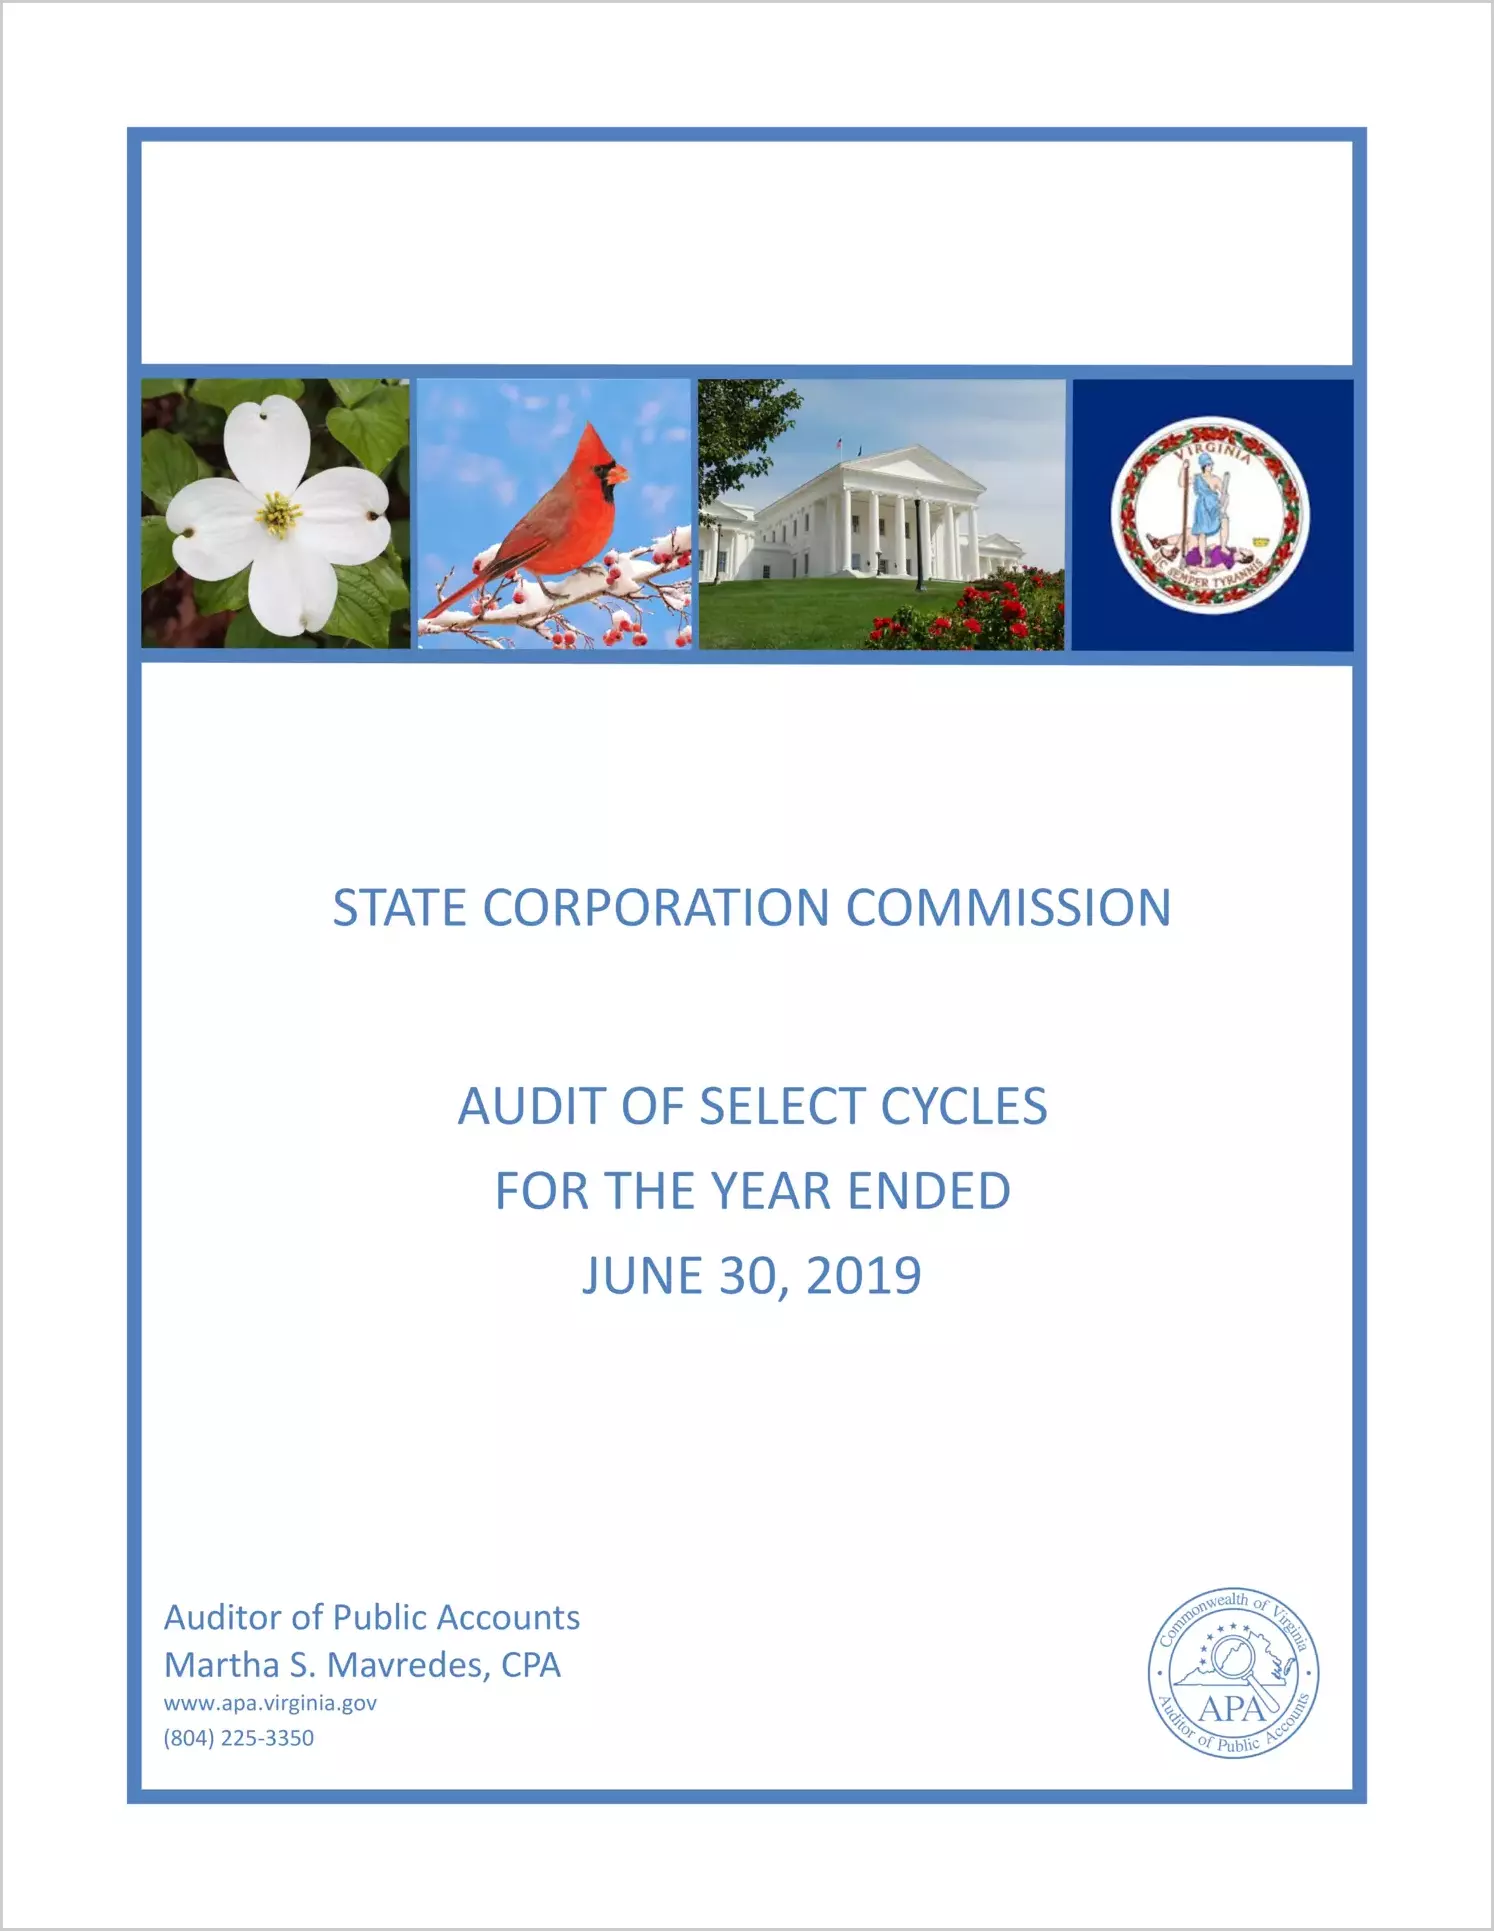 State Corporation Commission Audit of Select Cycles for the year ended June 30, 2019